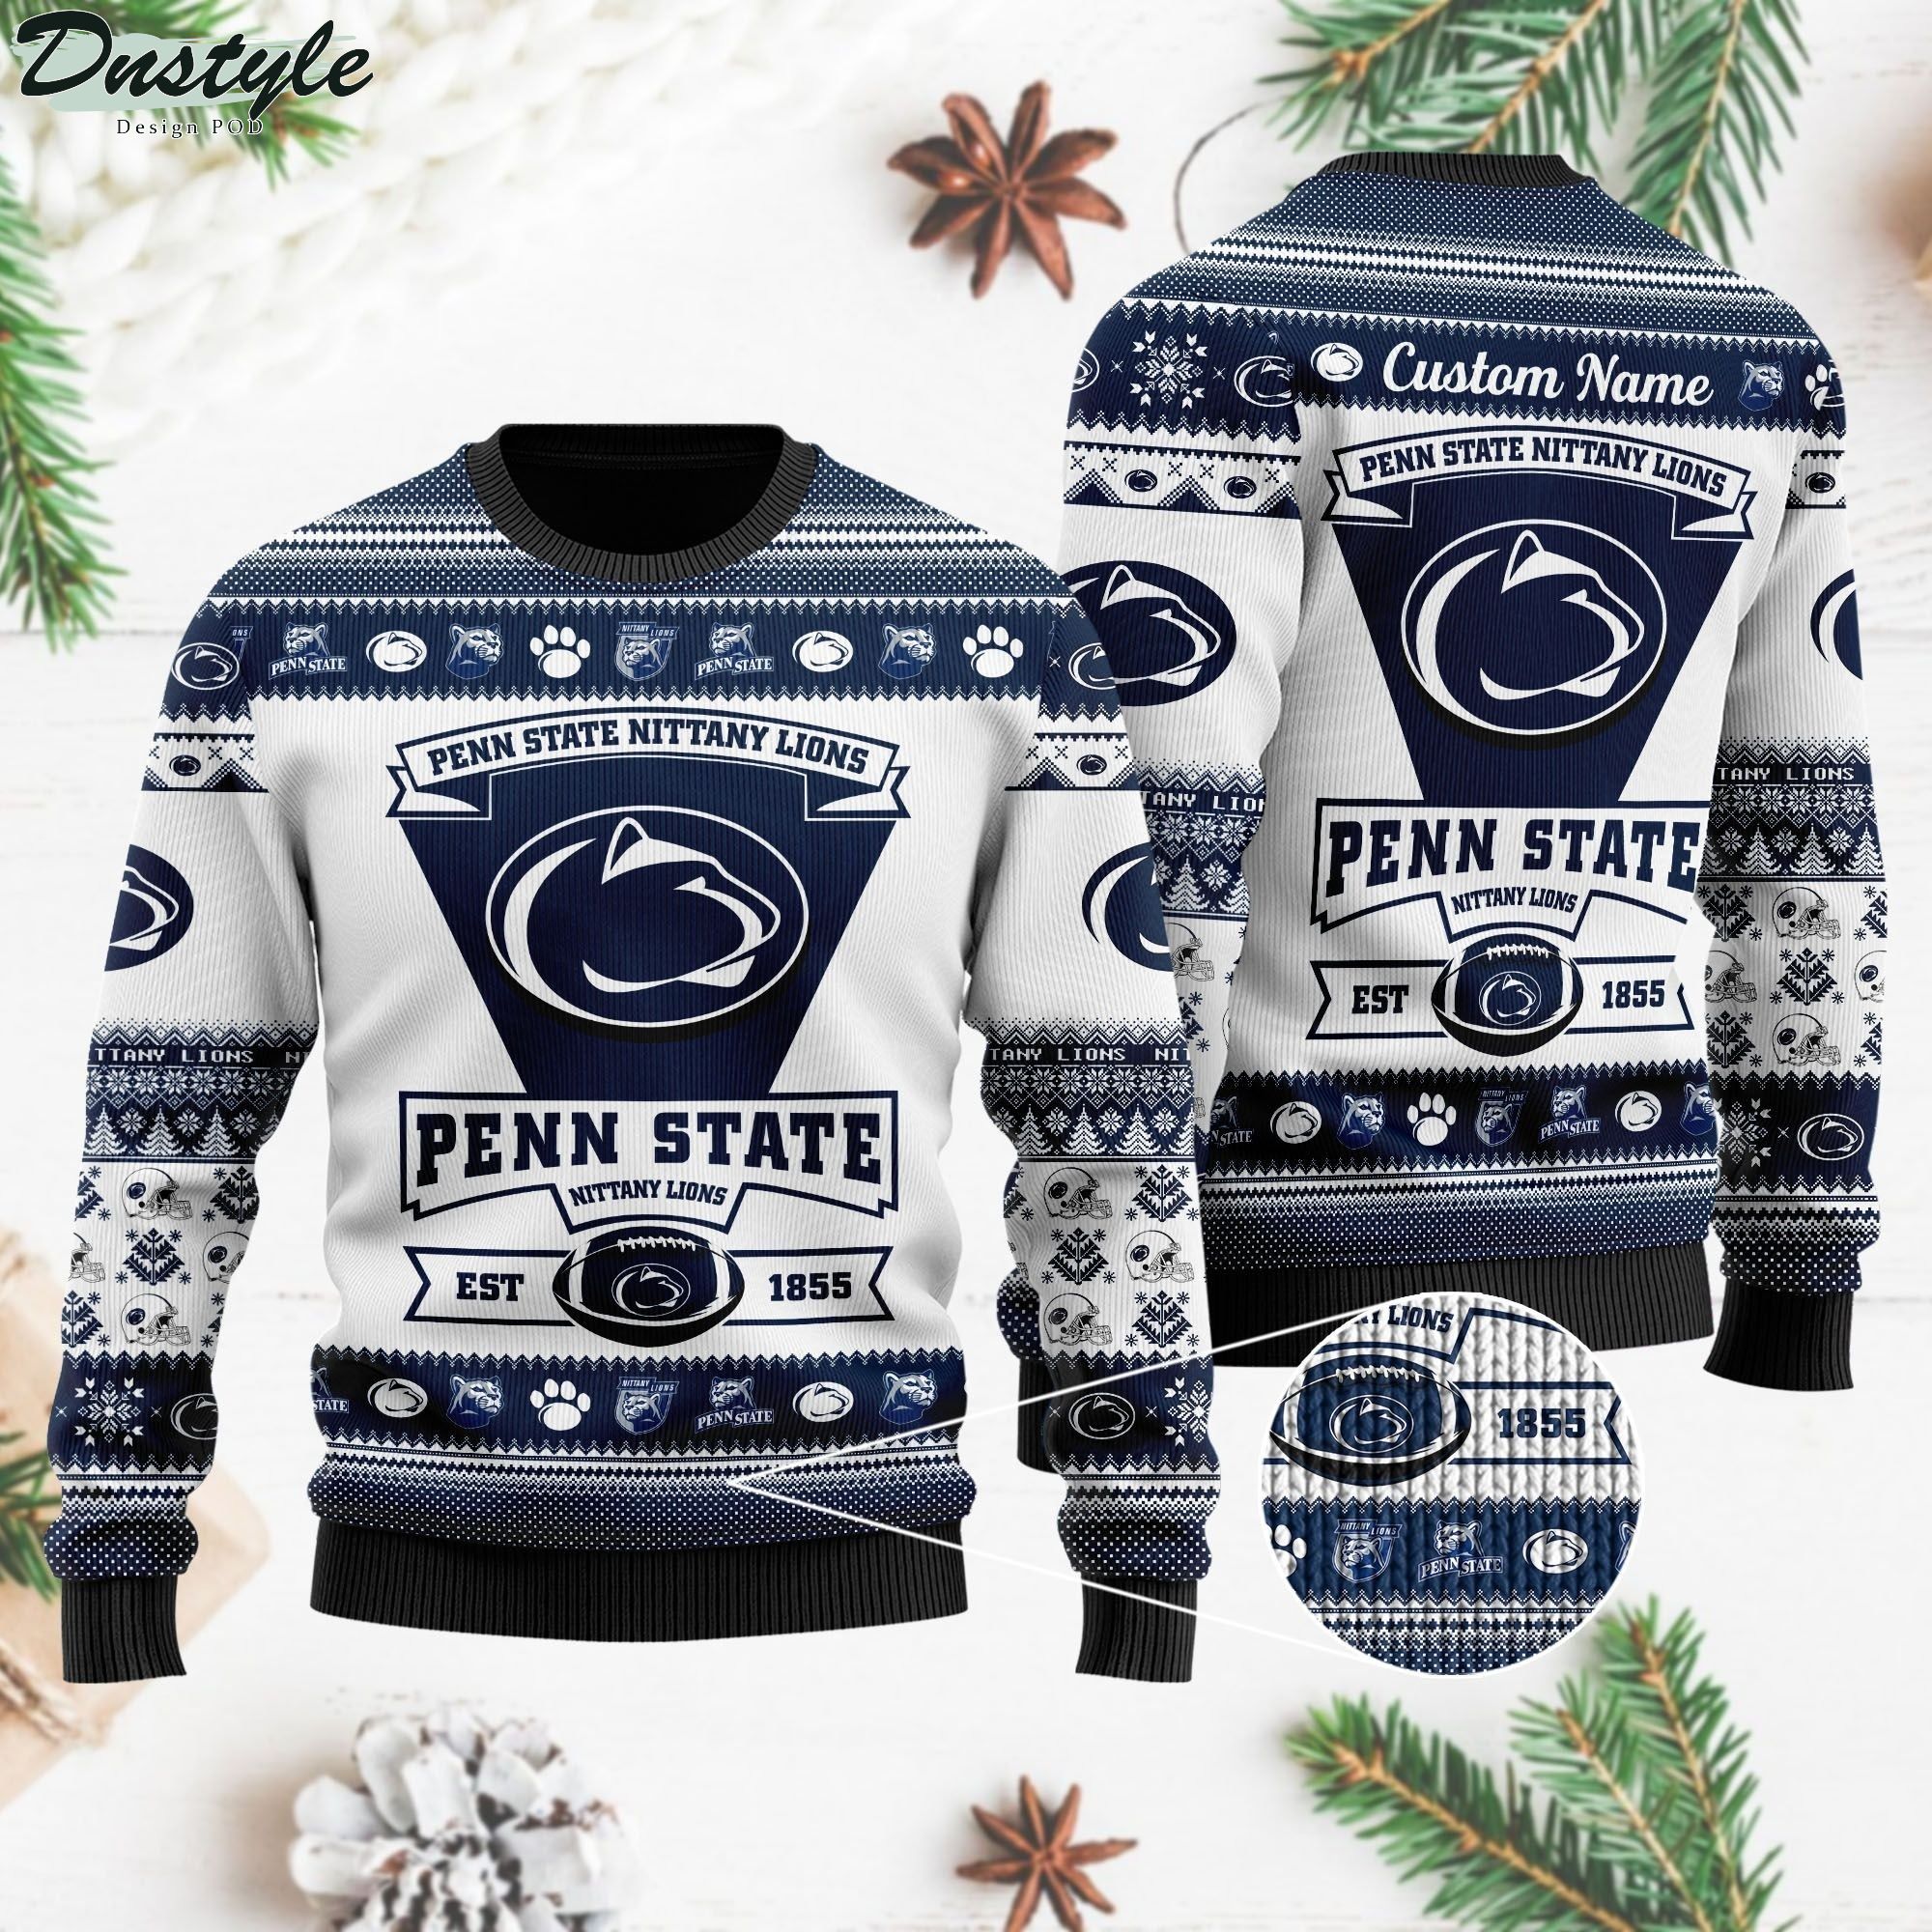 Penn State Nittany Lions Football Team Logo Personalized Ugly Christmas Sweater